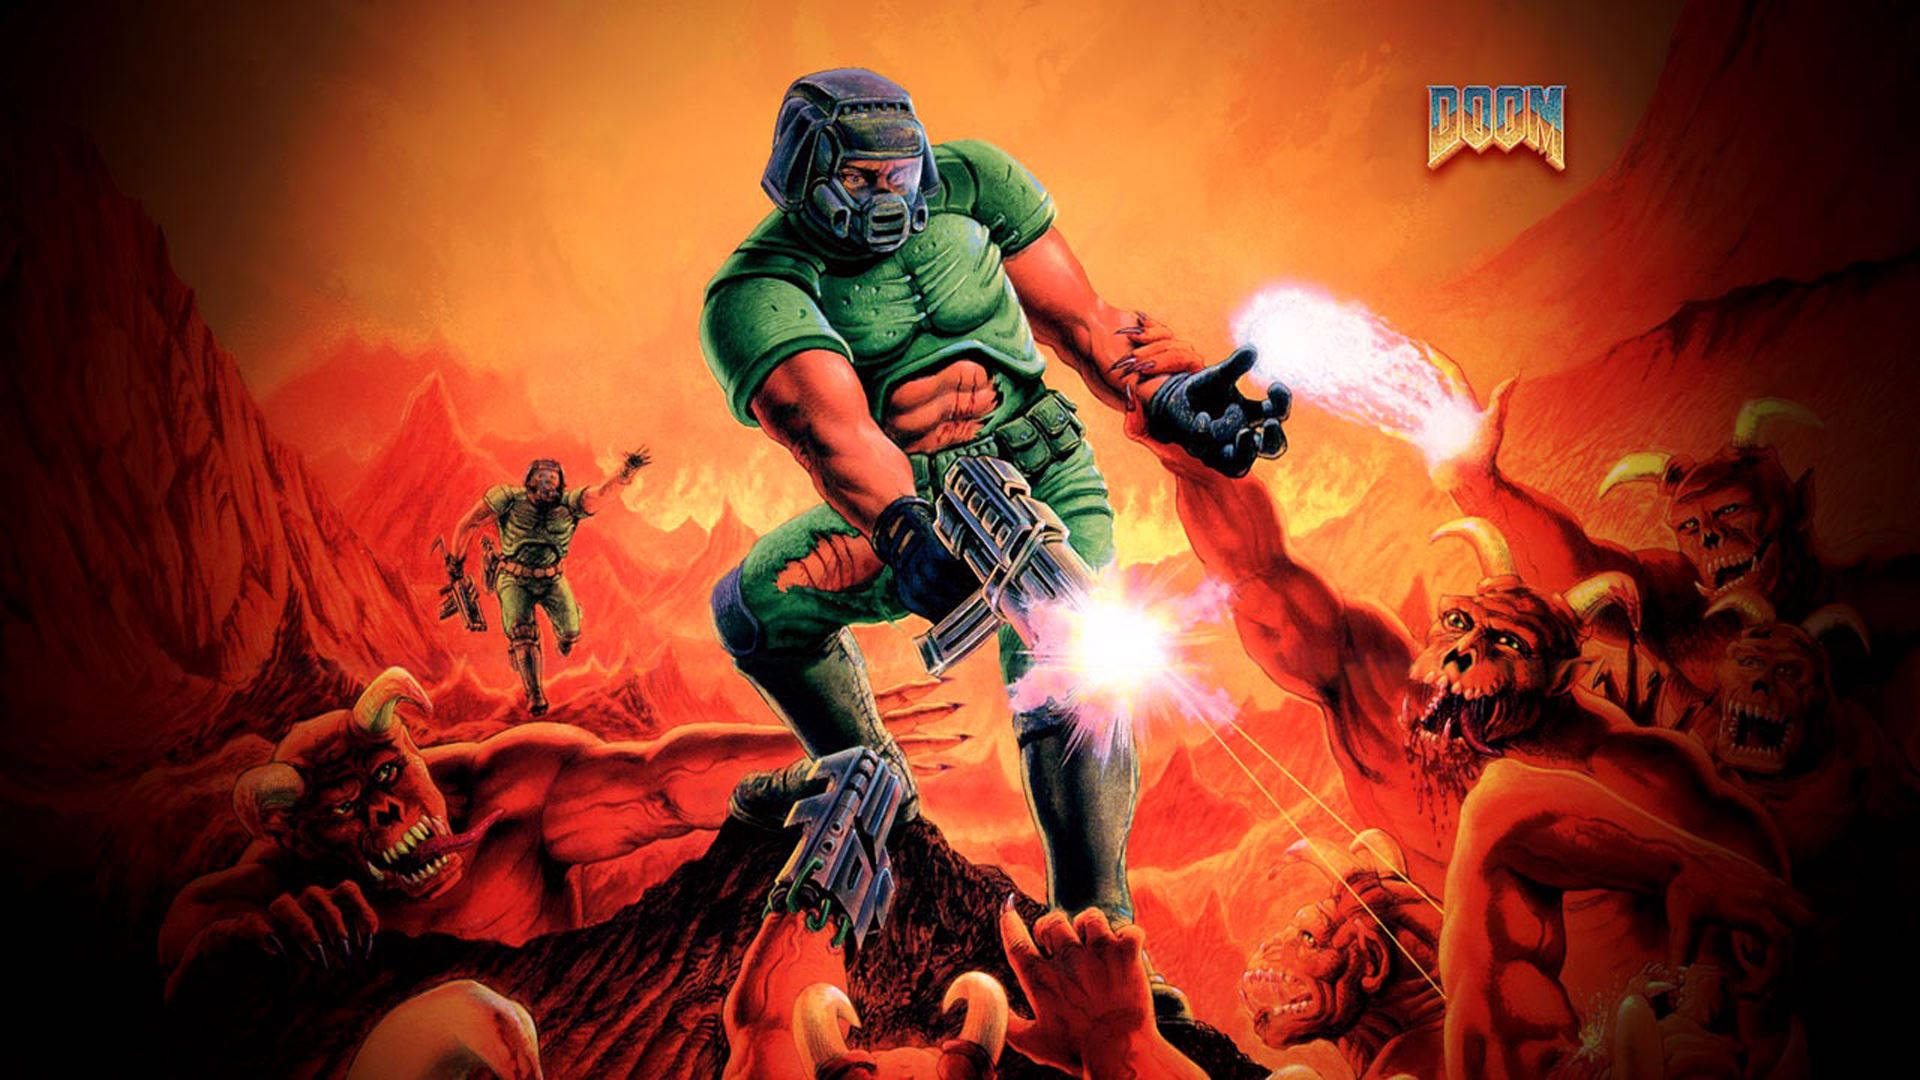 Doom - A Man In Green With A Gun Background